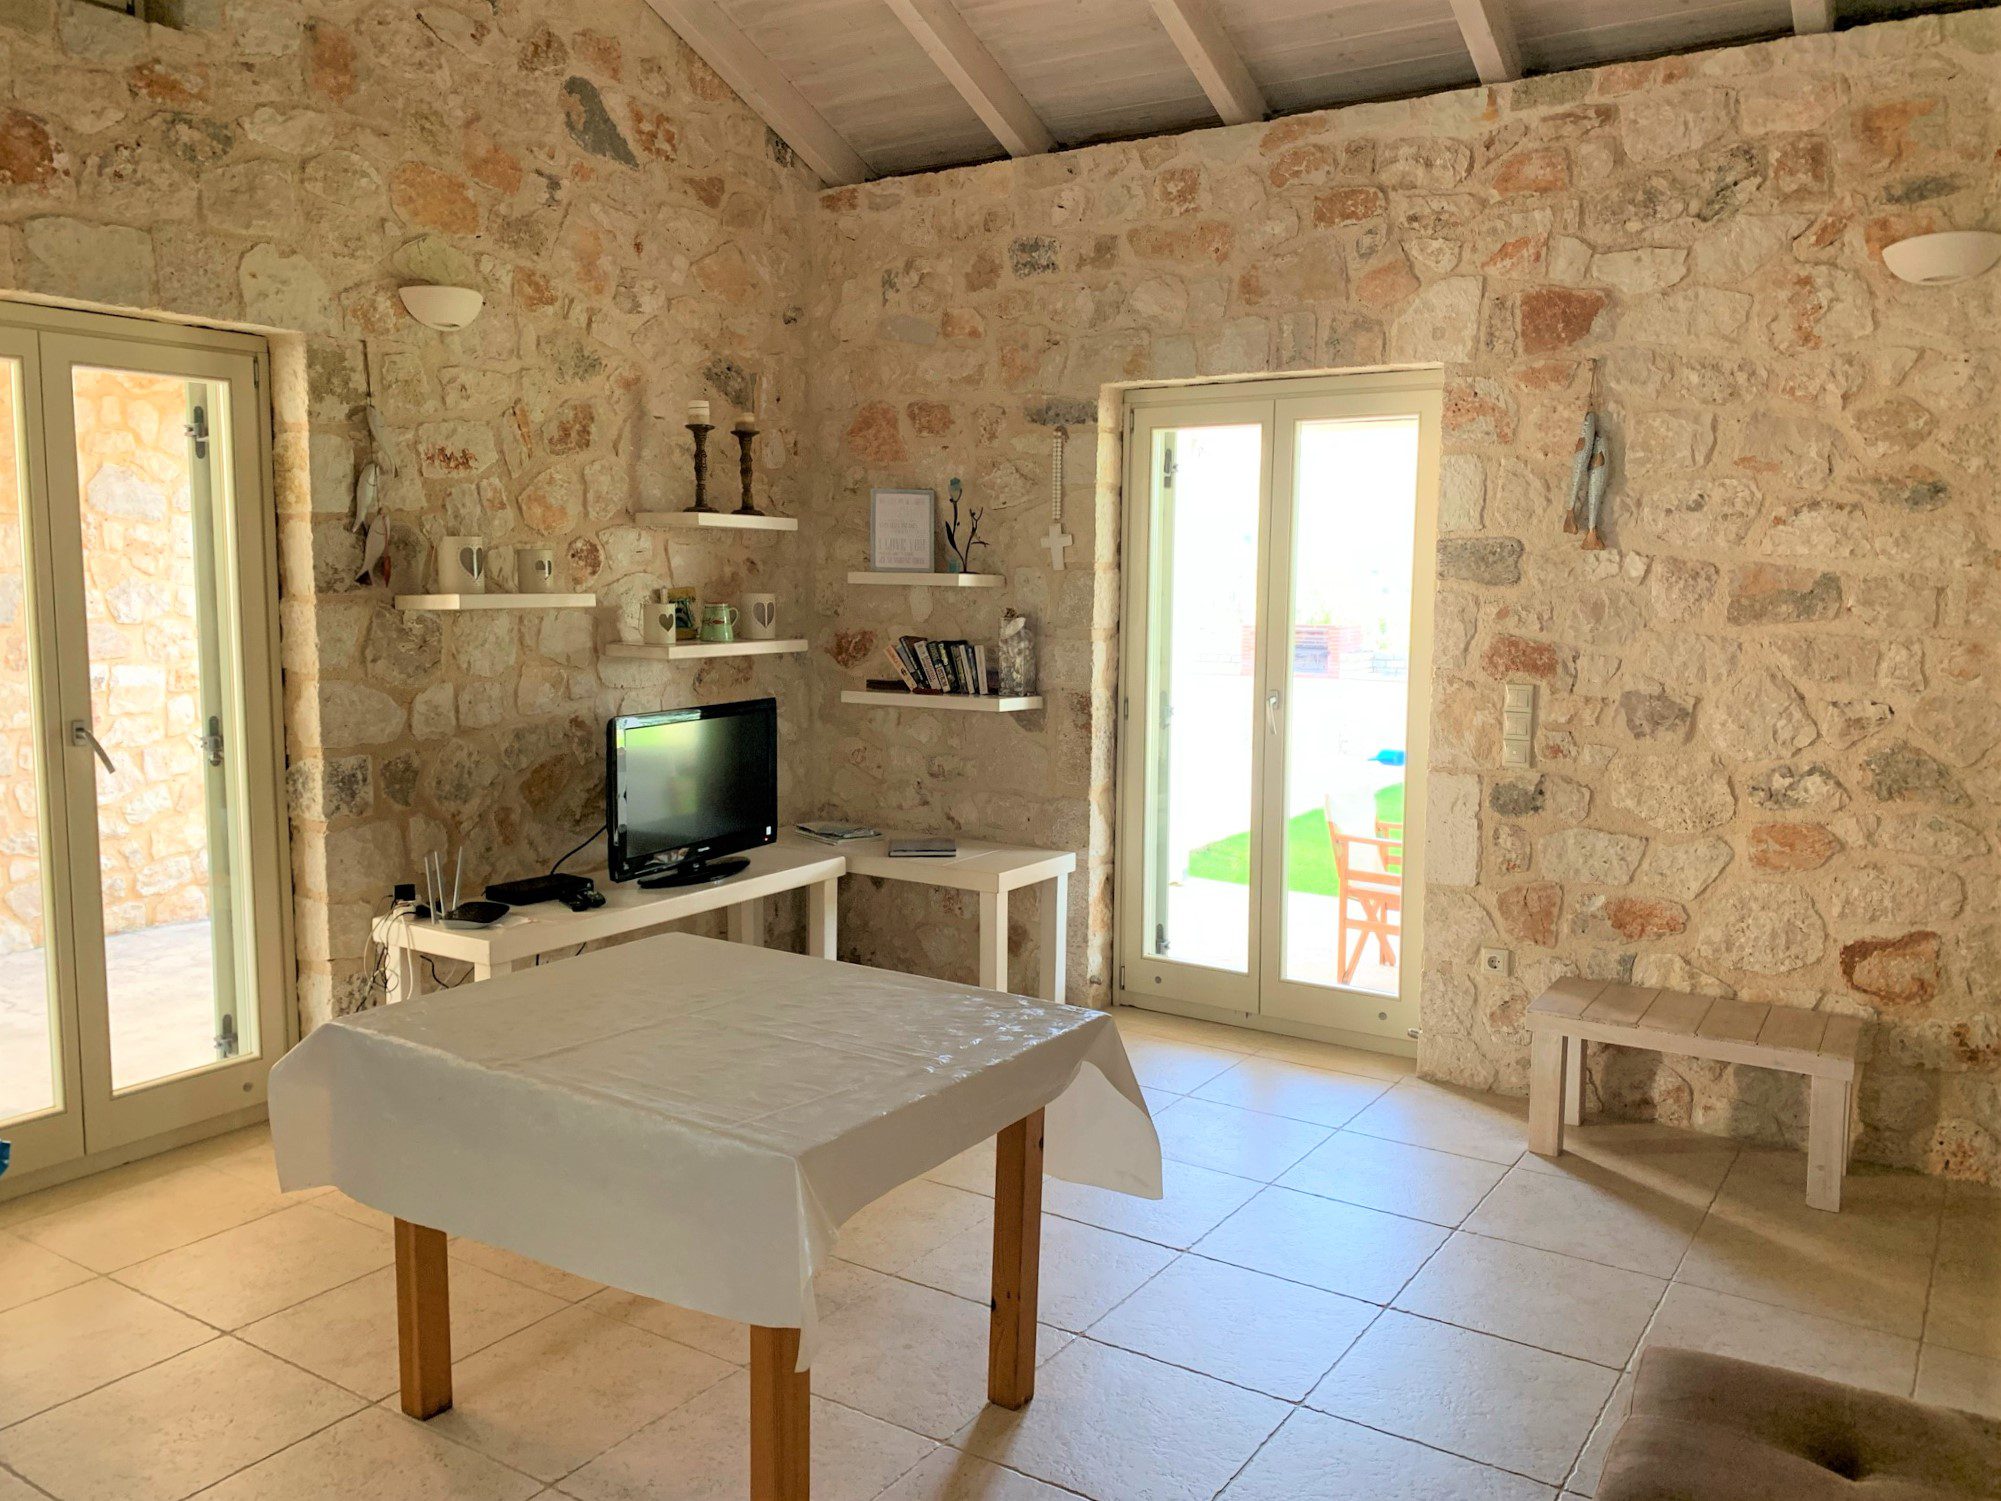 Interior space of holiday houses for rent on Ithaca Greece, Stavros